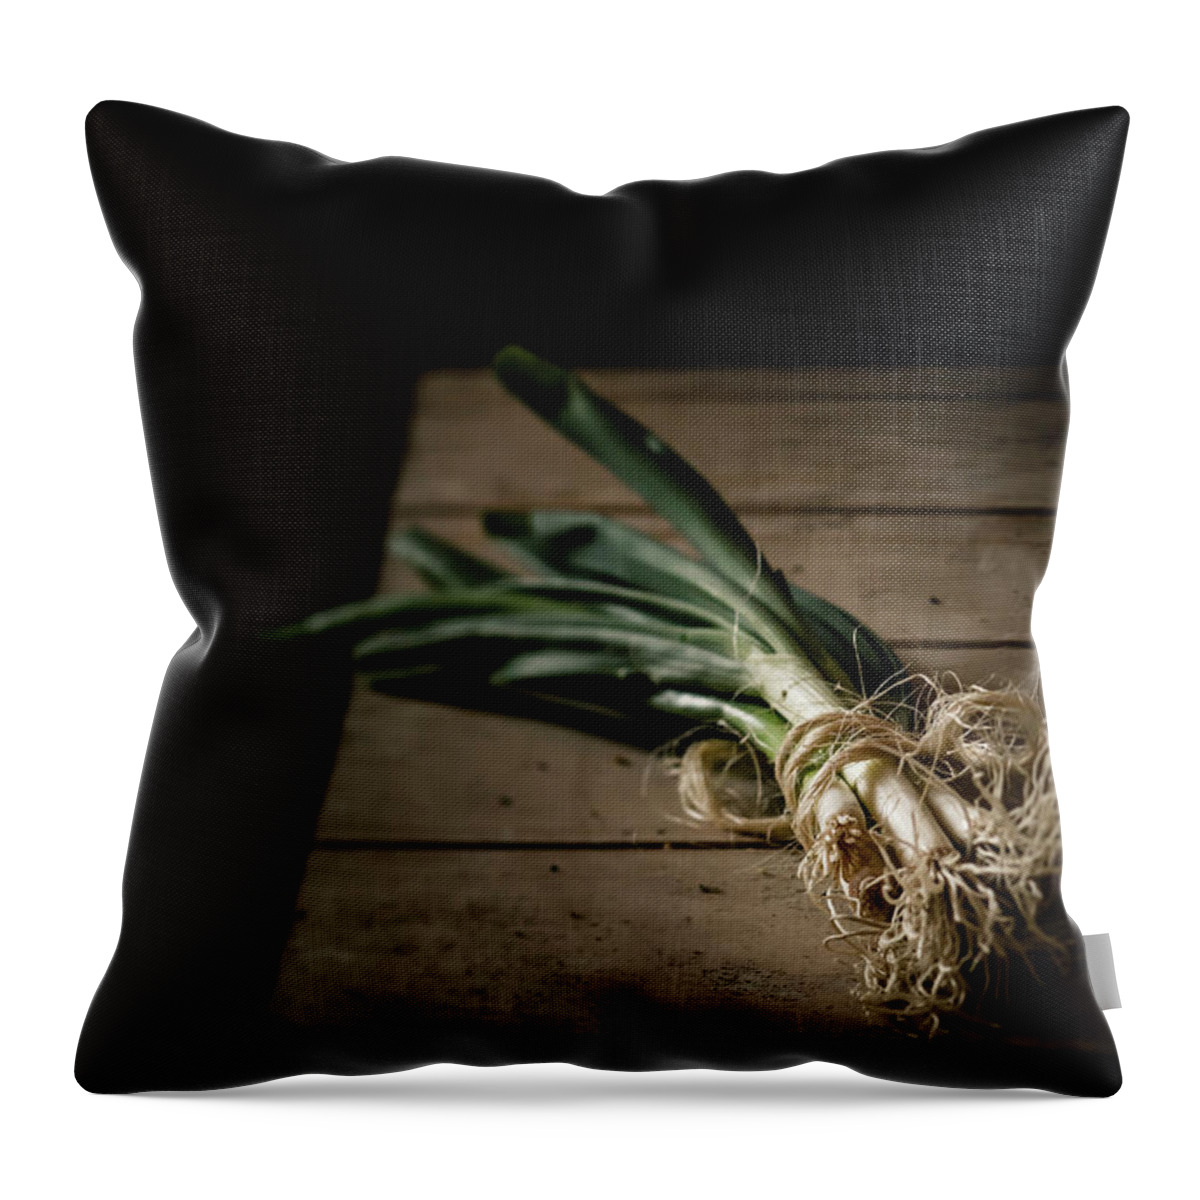 Black Background Throw Pillow featuring the photograph Bunch Of Spring Onions Tied With by Westend61